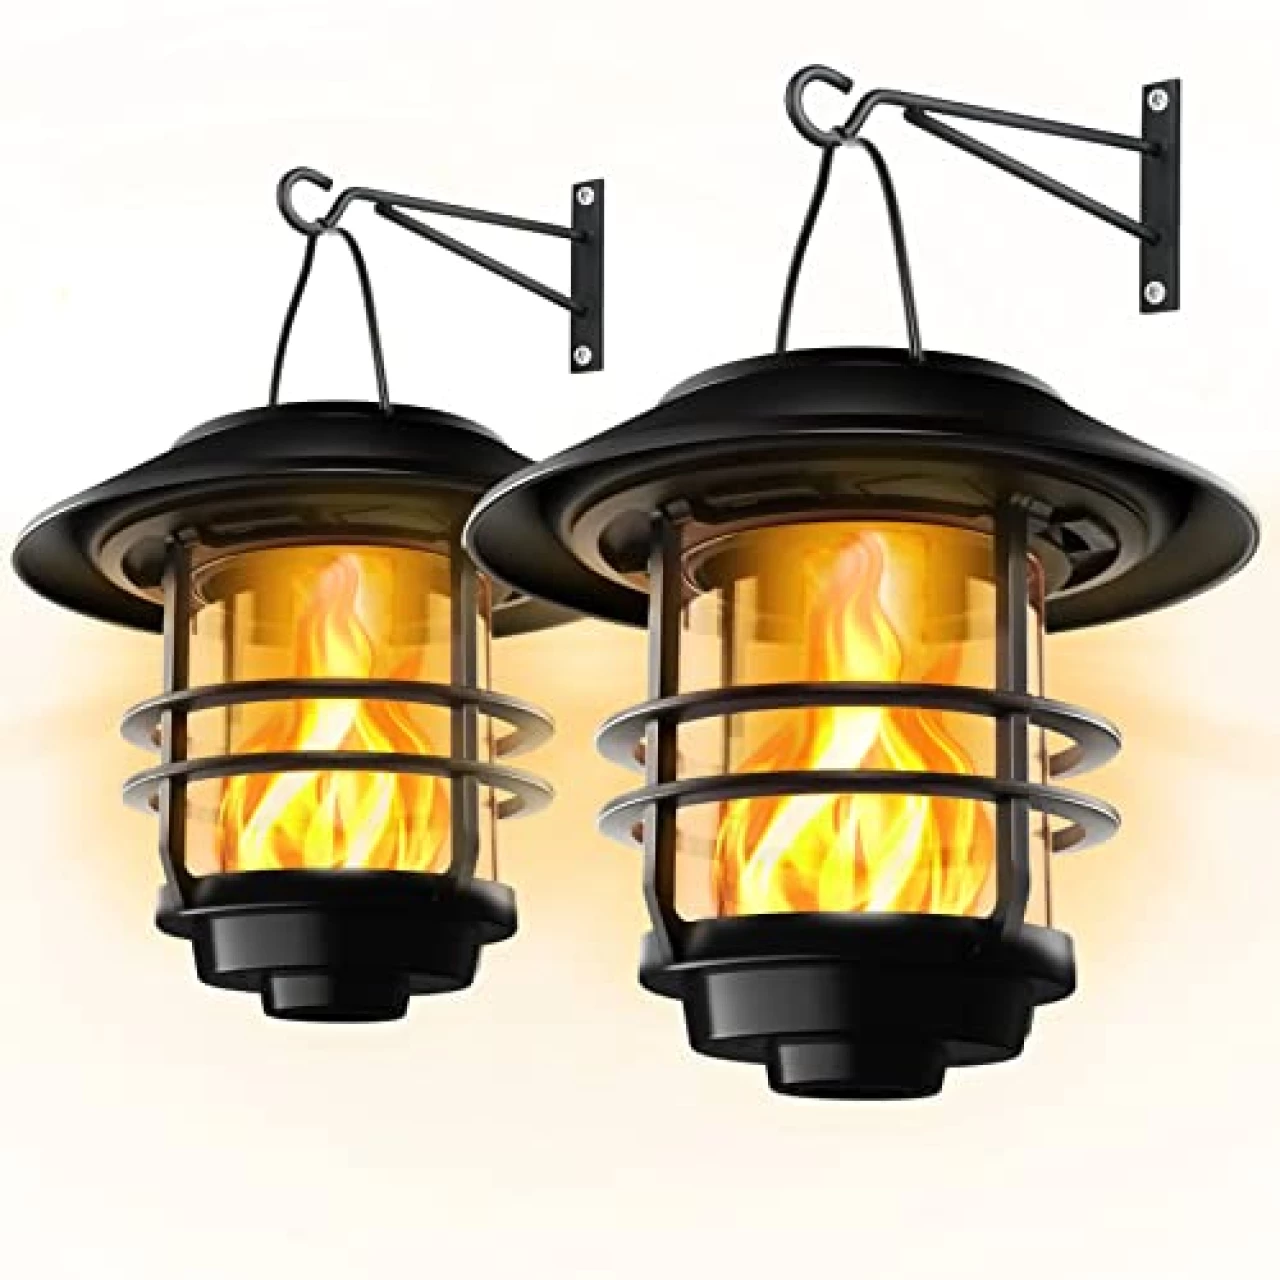 Otdair Solar Wall Lantern Outdoor, Flickering Flames Solar Sconce Lights Outdoor, Hanging Solar Lamps Wall Mount for Front Porch, Patio and Yard, 2 Pack